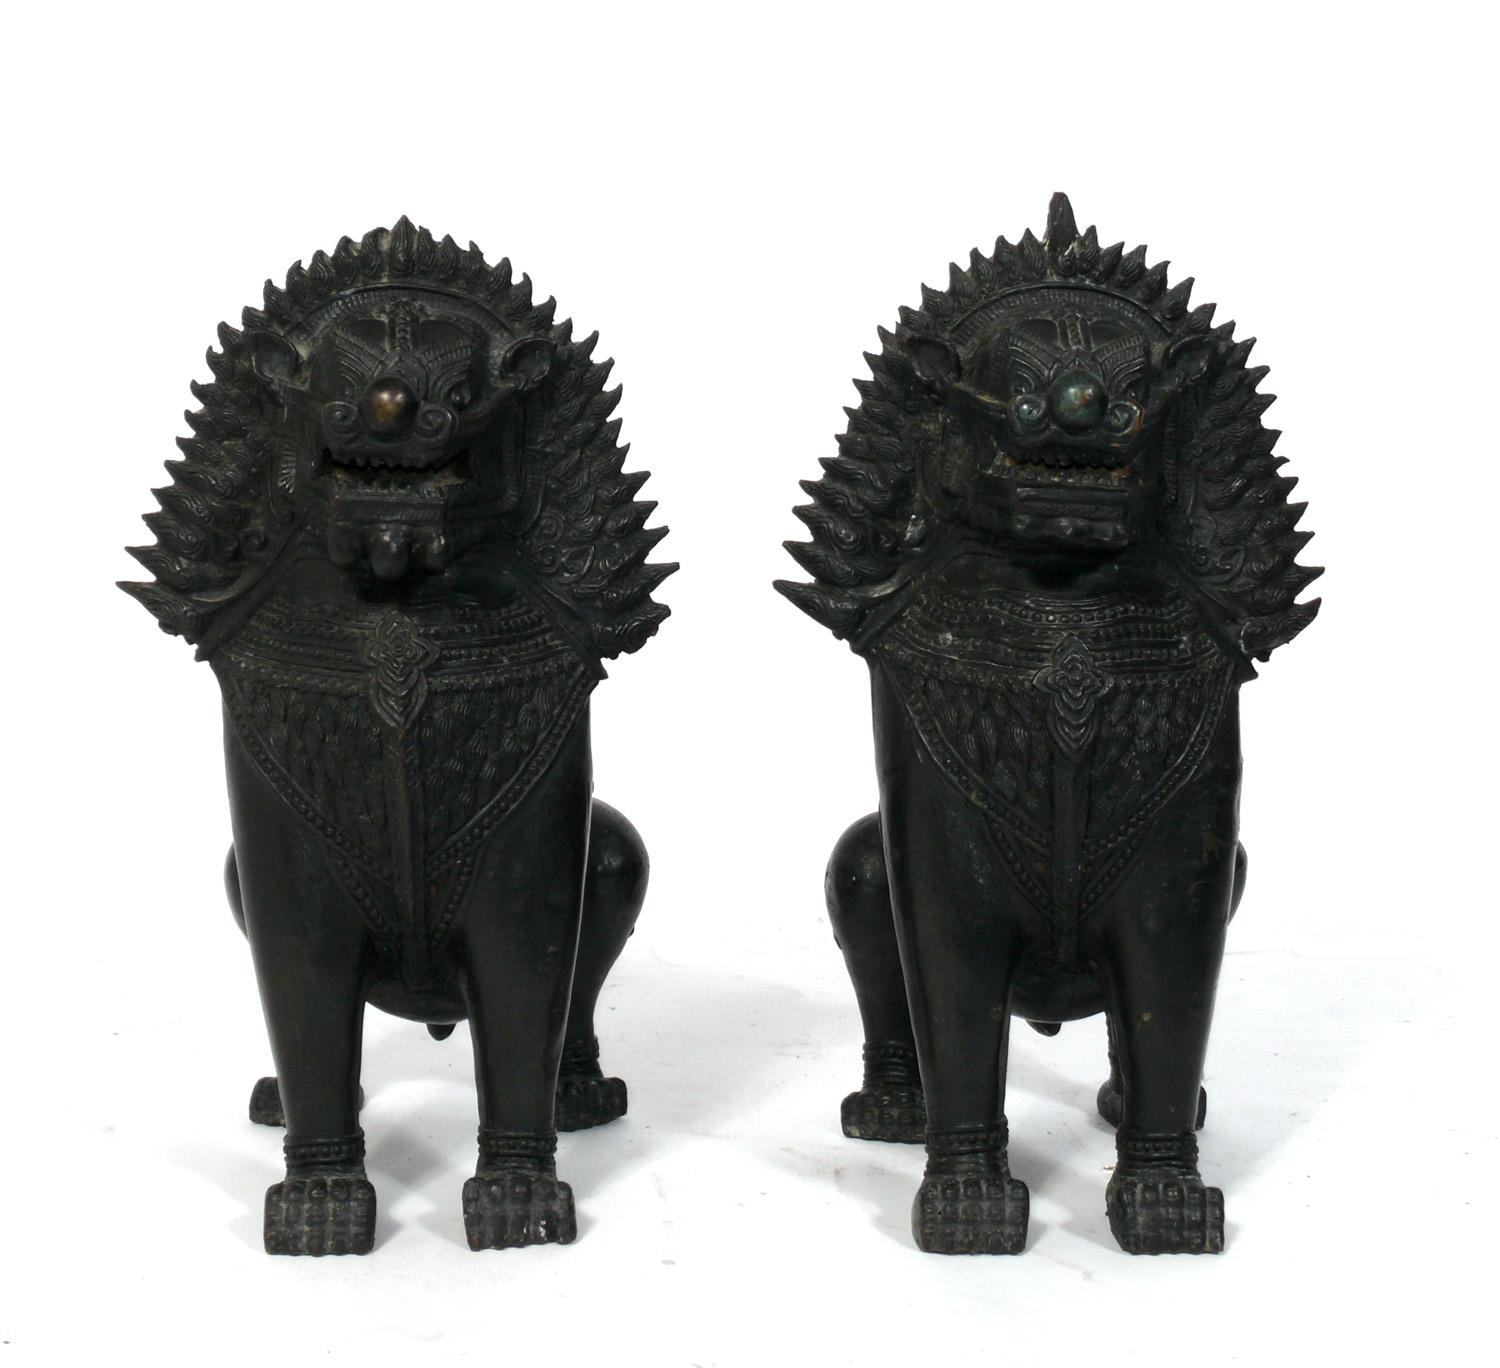 Pair of Large Asian Bronze Foo Dogs or Kylin Dragon, probably Chinese, circa 1950s or earlier. They retain their warm original patina. These were purchased from the Manhattan estate of a Japanese American that traveled extensively through Asia in